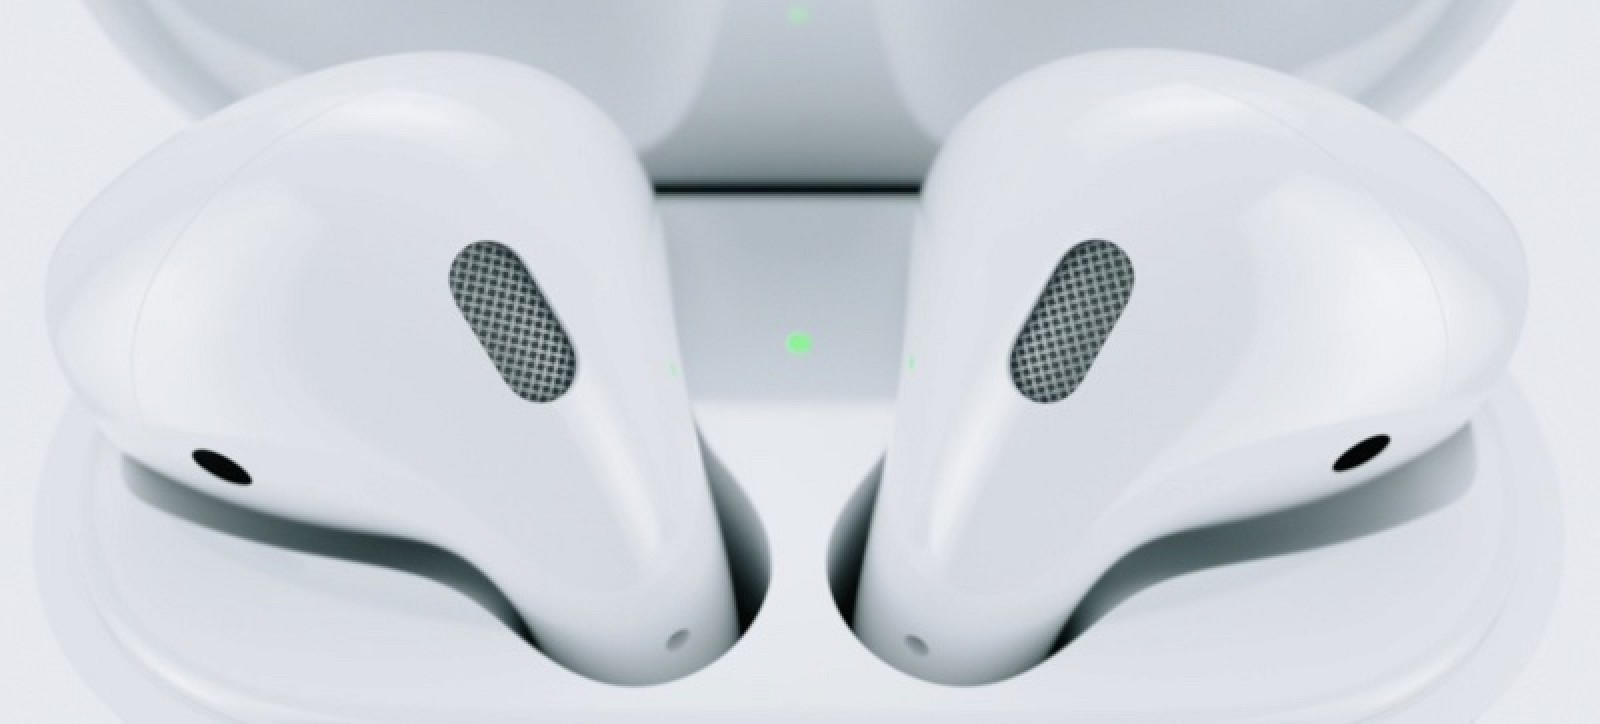 Report: 'AirPods Pro' to Launch End of October with New Design, New Noise-Canceling Feature and $260 Price Tag - MacRumors thumbnail